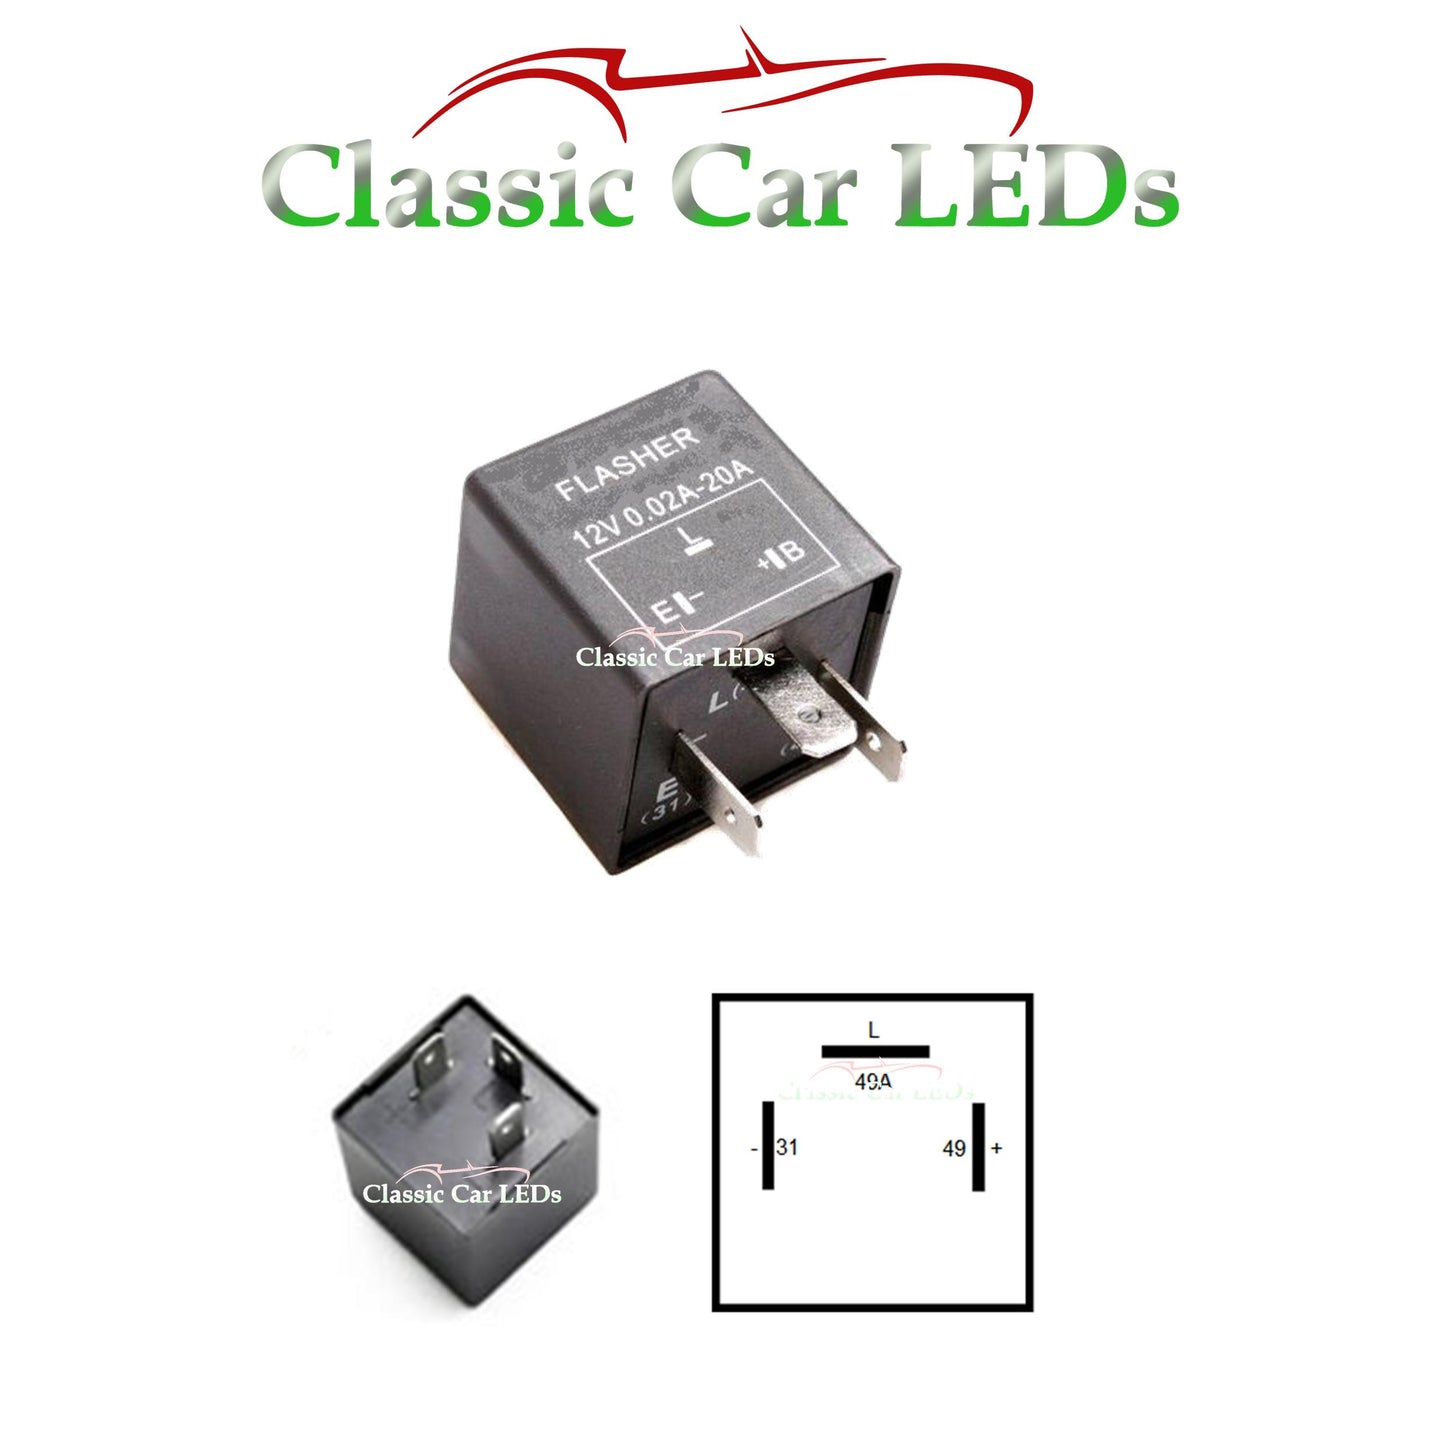 Porsche 911, 924, 928, 944, 968, 964, 993 Electronic Clicking Flasher Relay - great for LED or Standard Bulbs